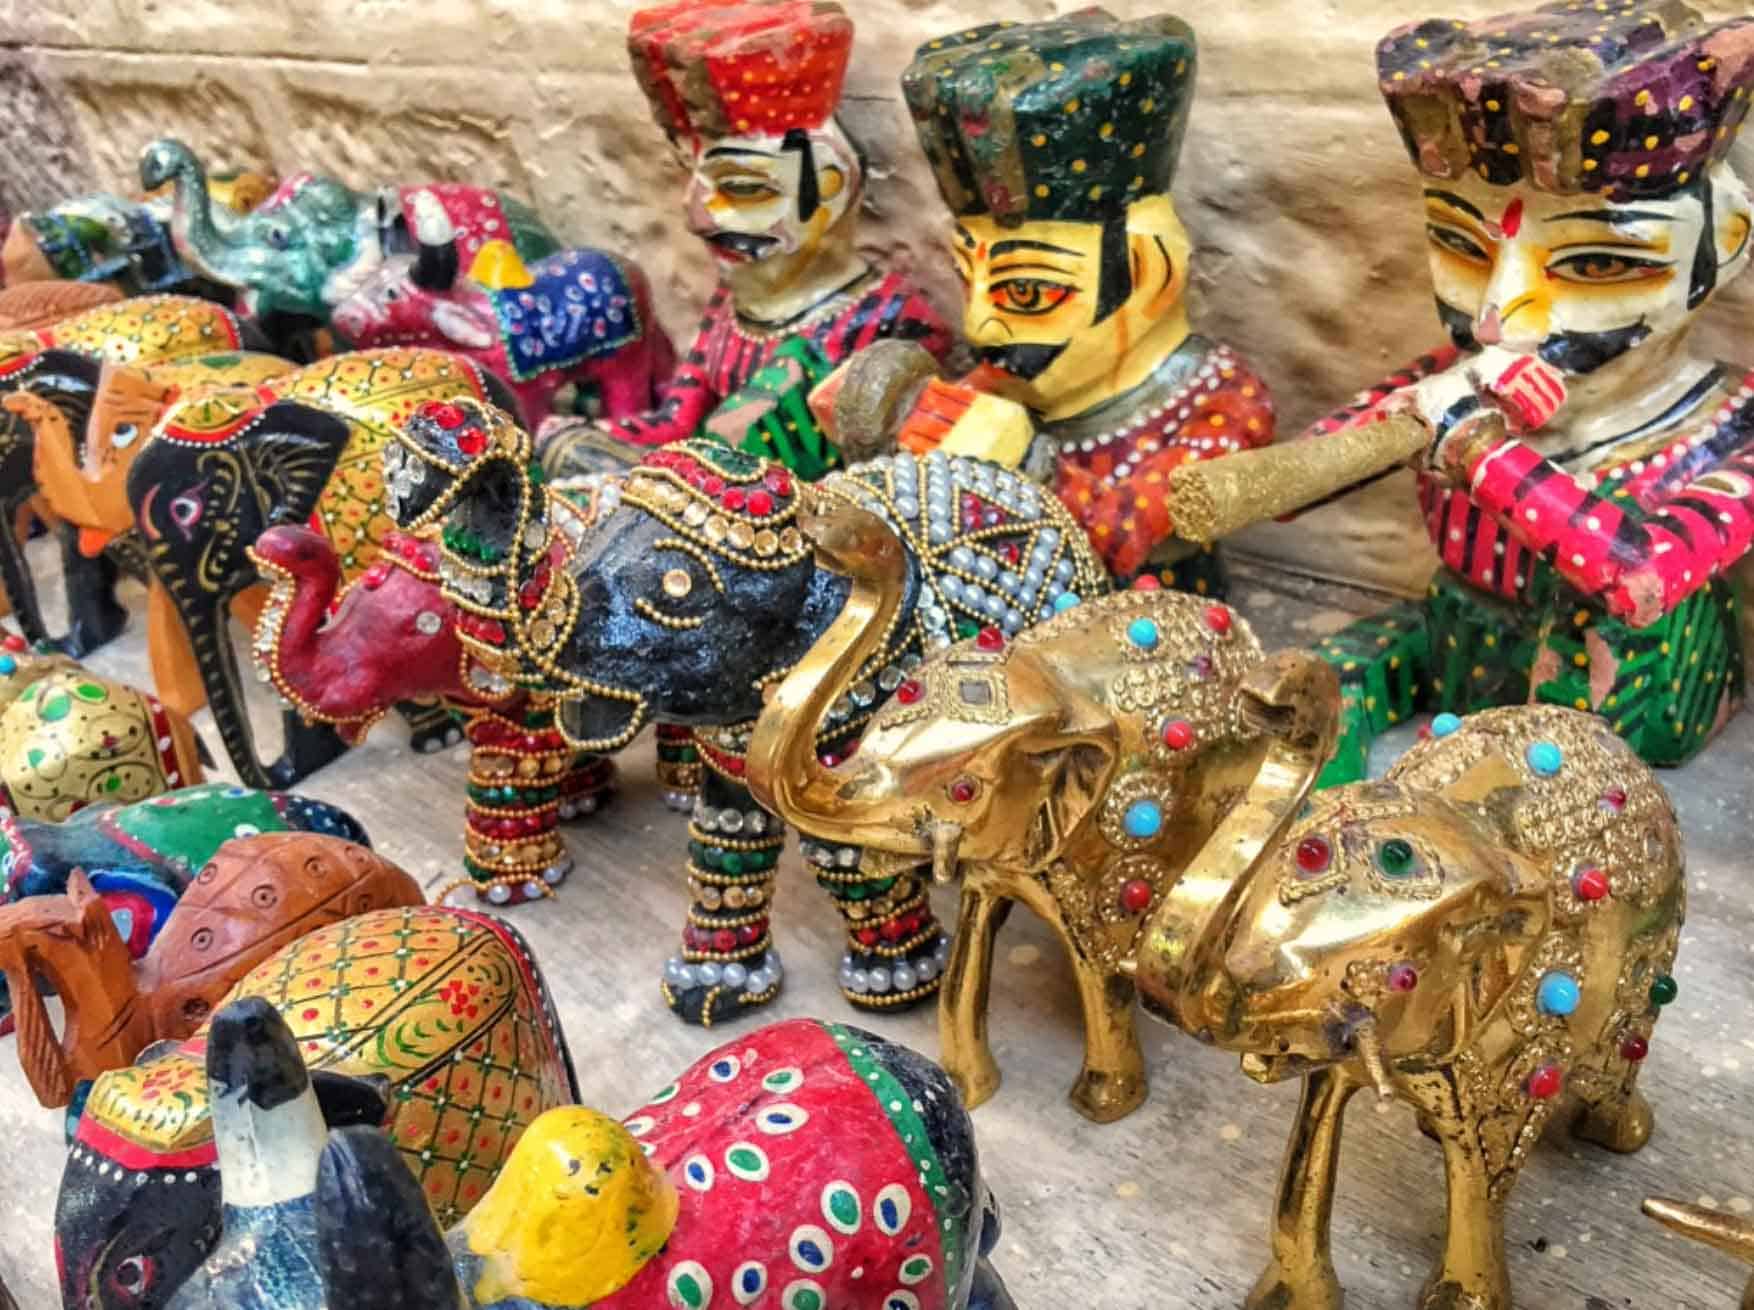 metal and paper figurines for sale at the market in Jaisalmer, Rajasthan